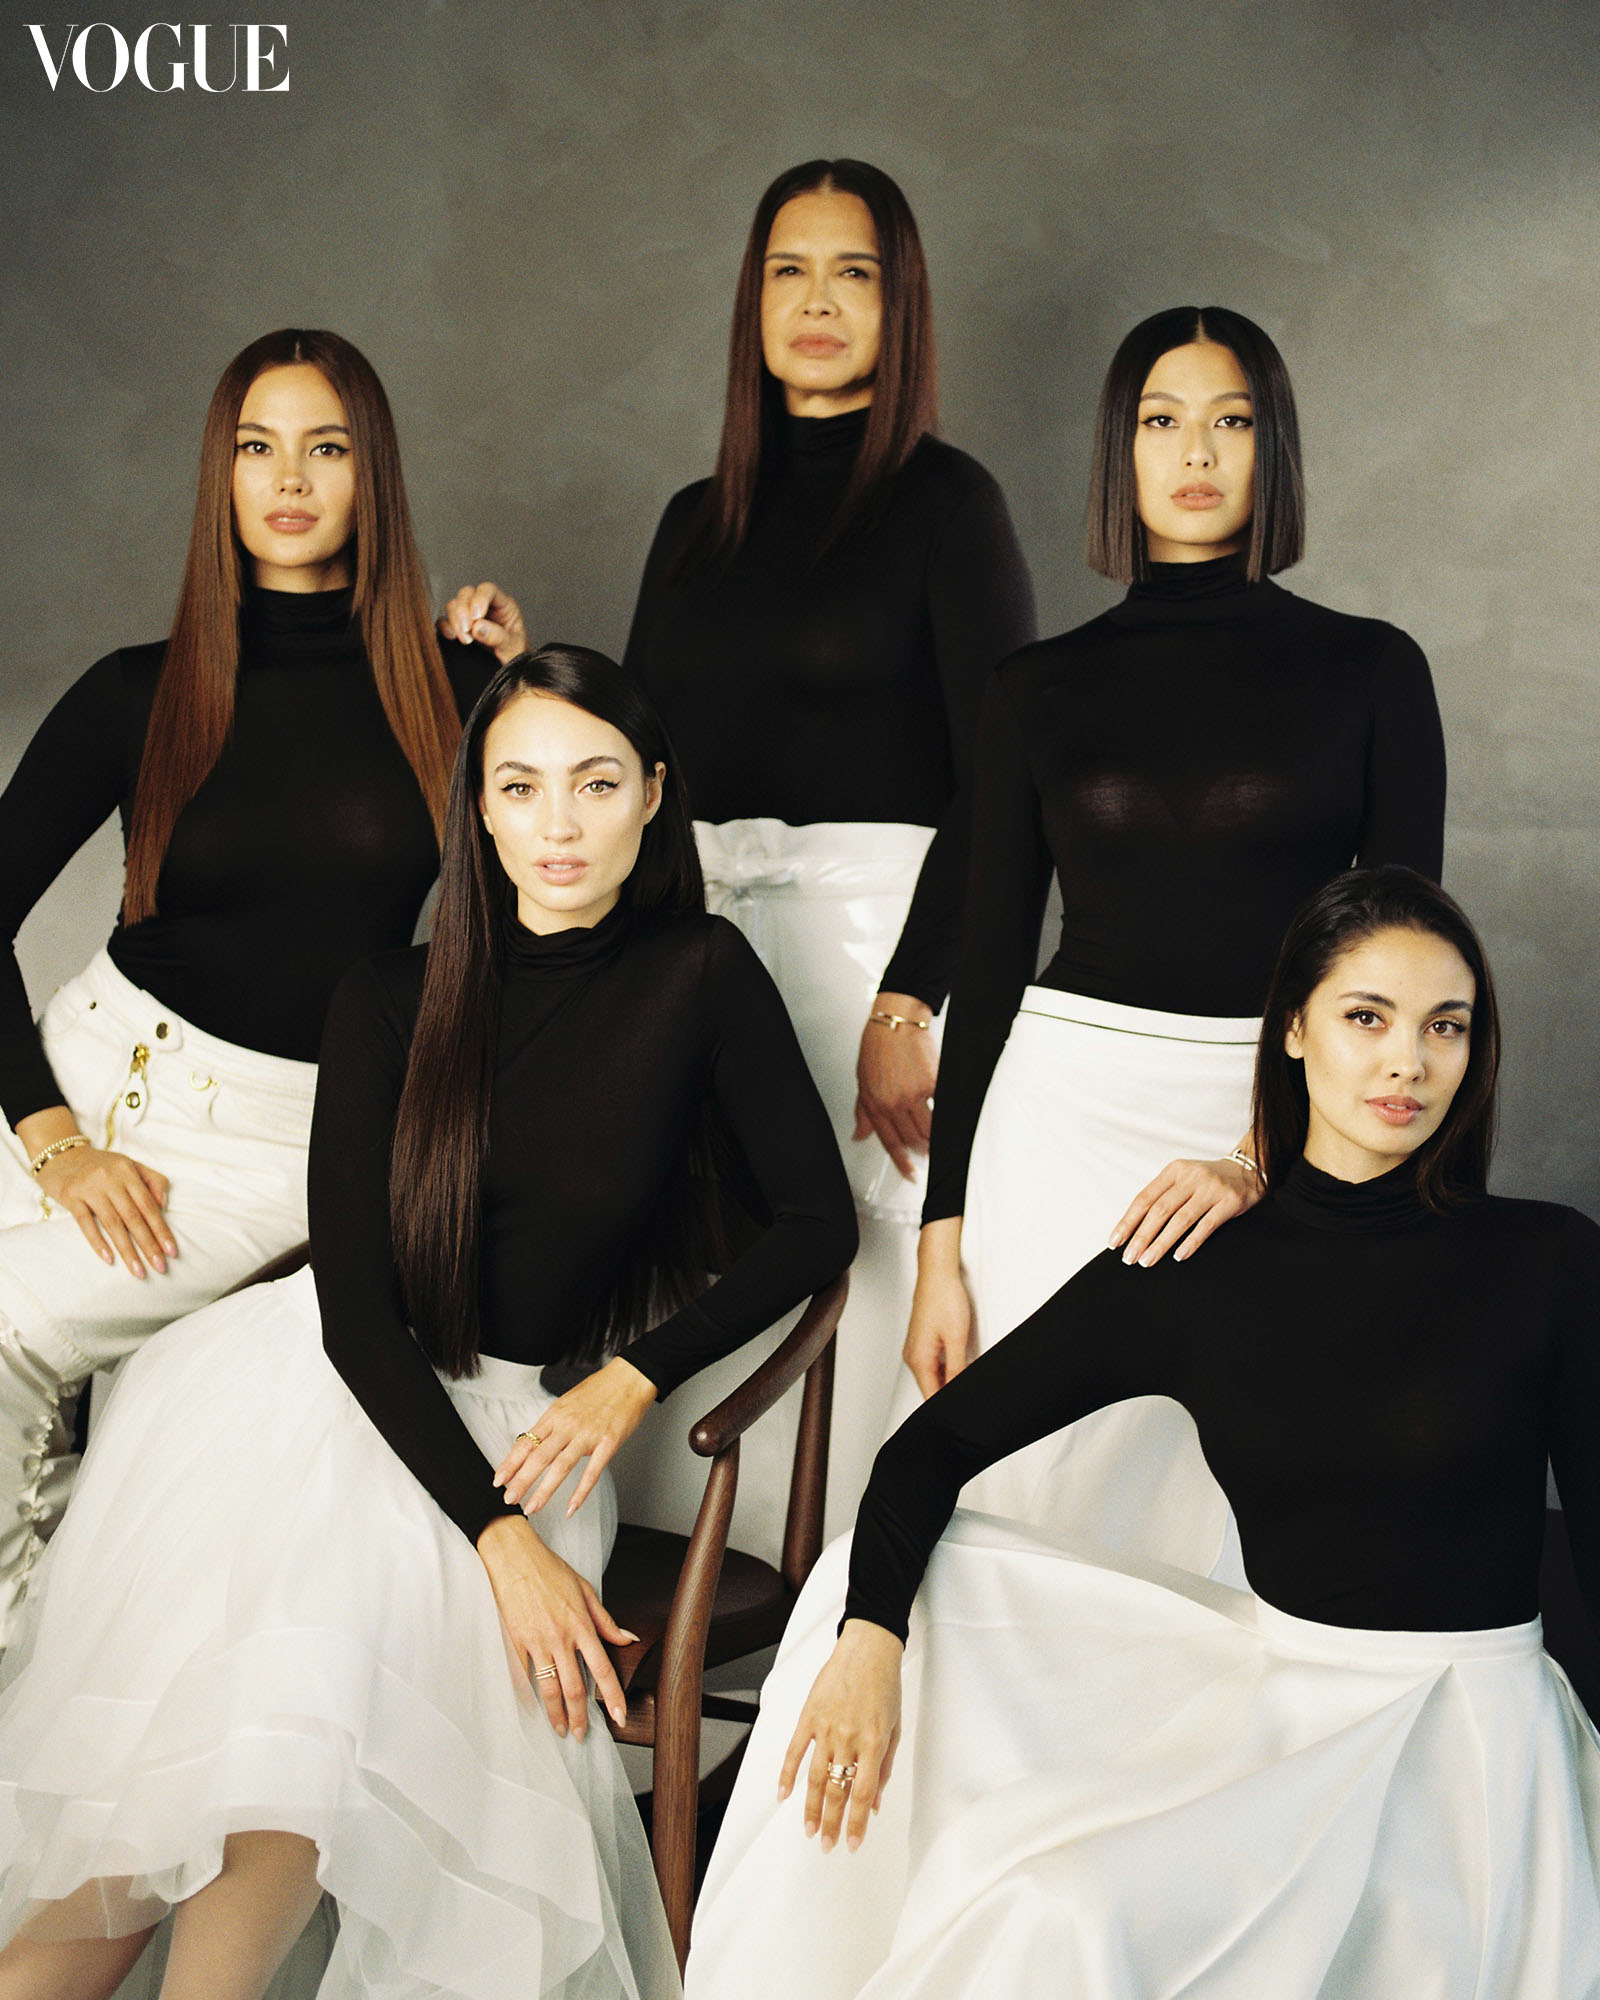 Megan Young, Melanie Marquez, Catriona Gray, R'Bonney Gabriel, and Michelle Dee posing in a black and white ensemble